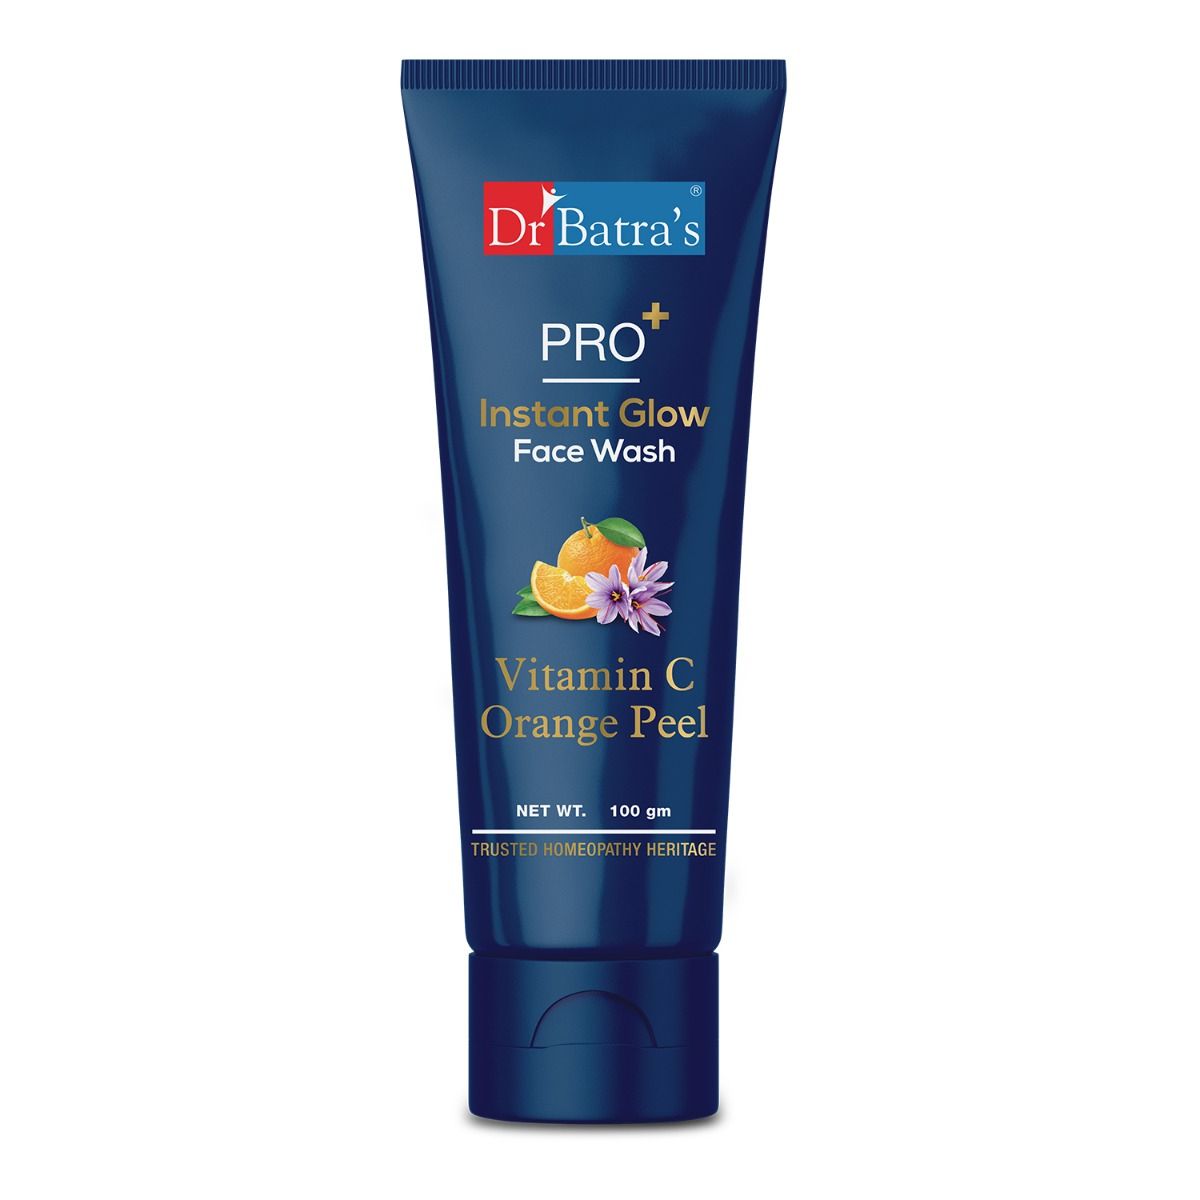     			Dr Batra's Pro+ Instant Glow Face Wash. Rejuvenates Skin Sulphatefree, Siliconefree 100 Gm